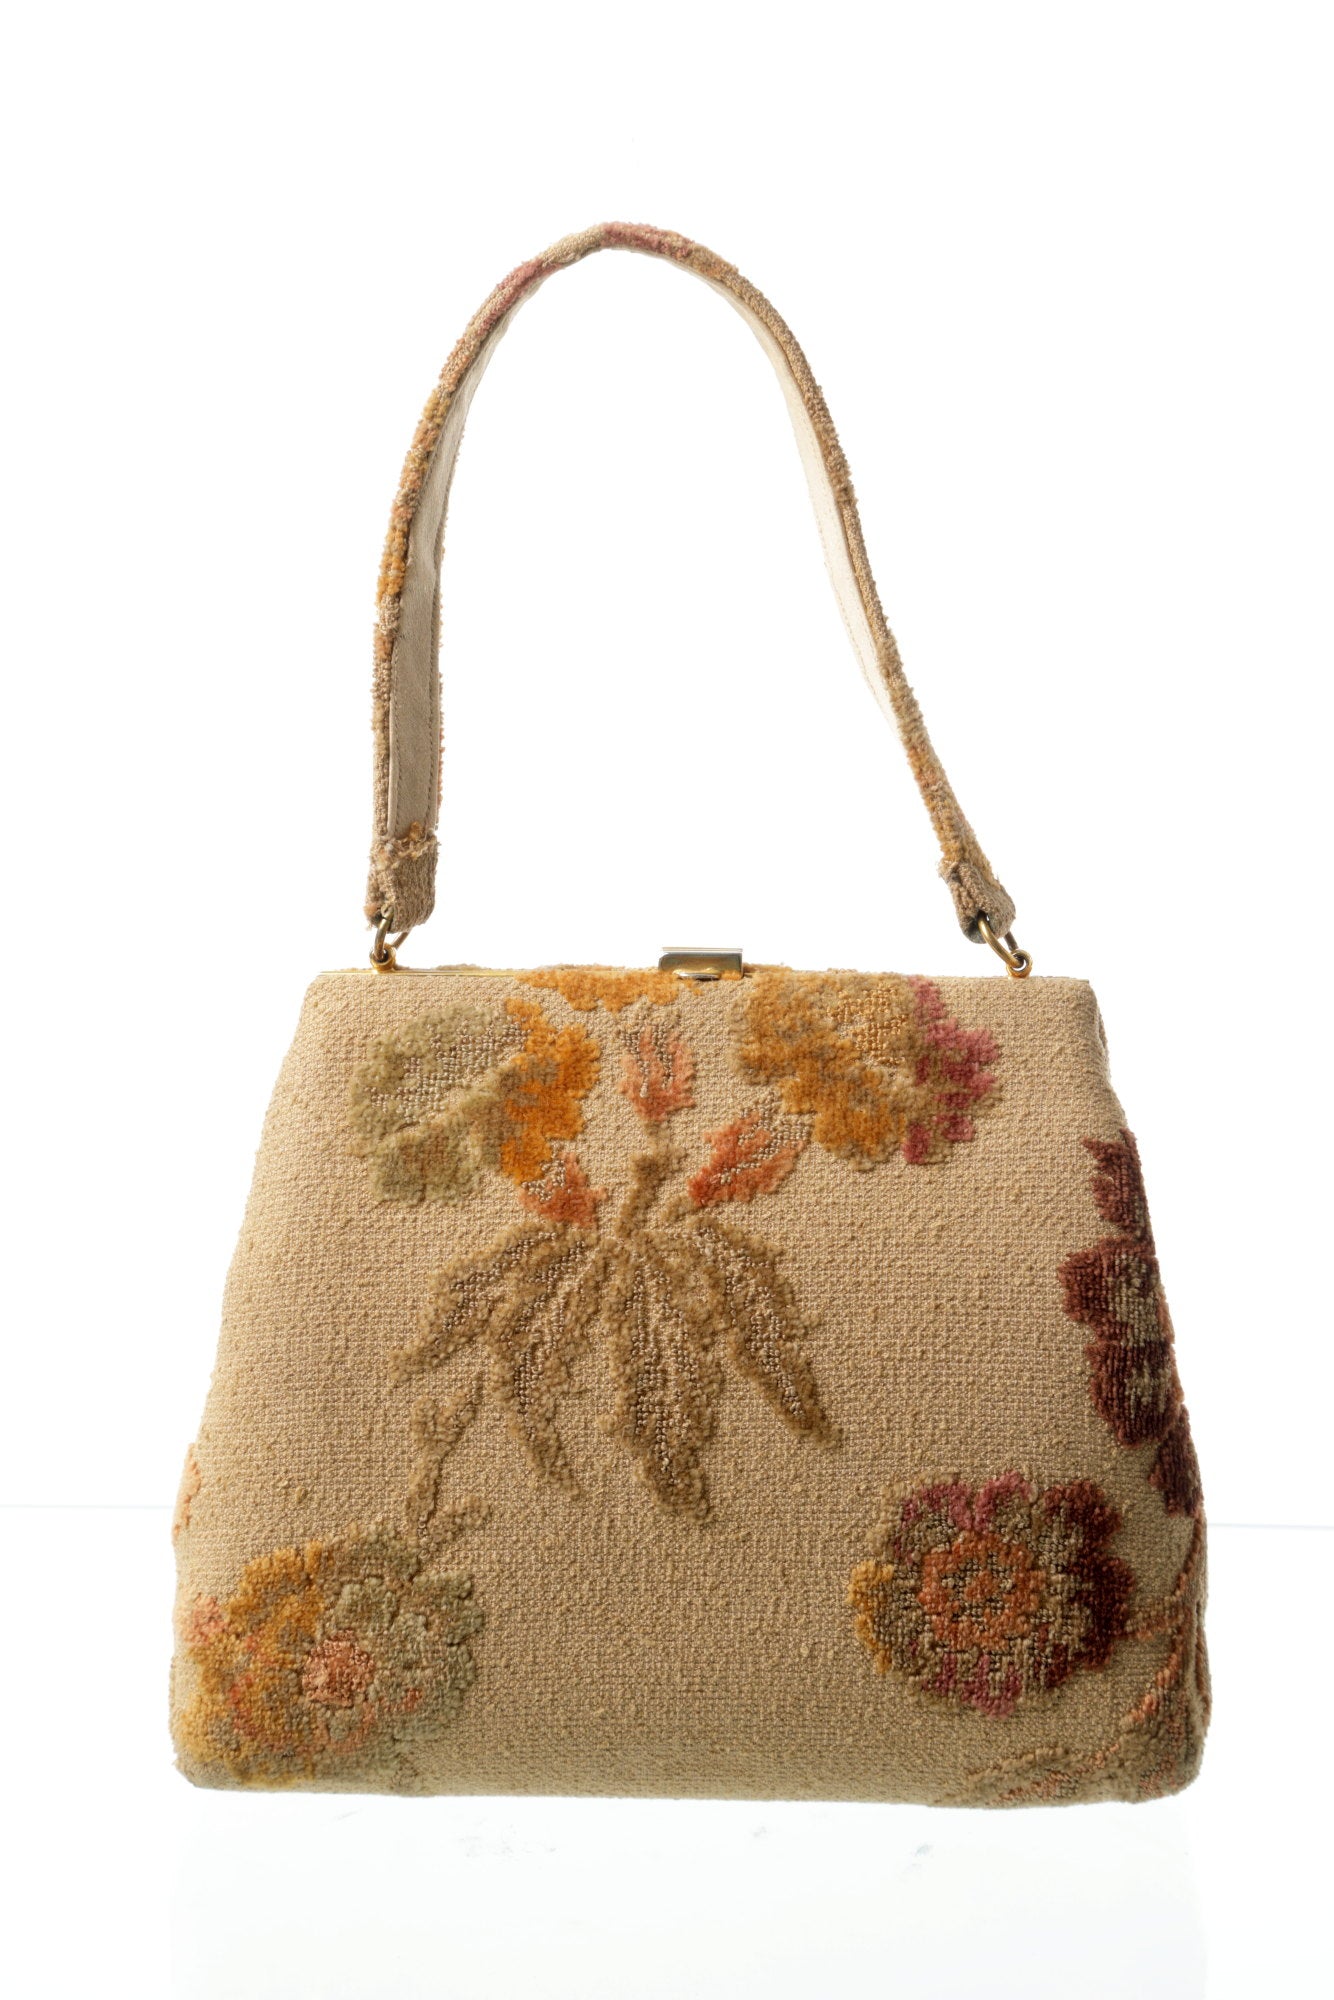 Bag in beige worked fabric with flowers